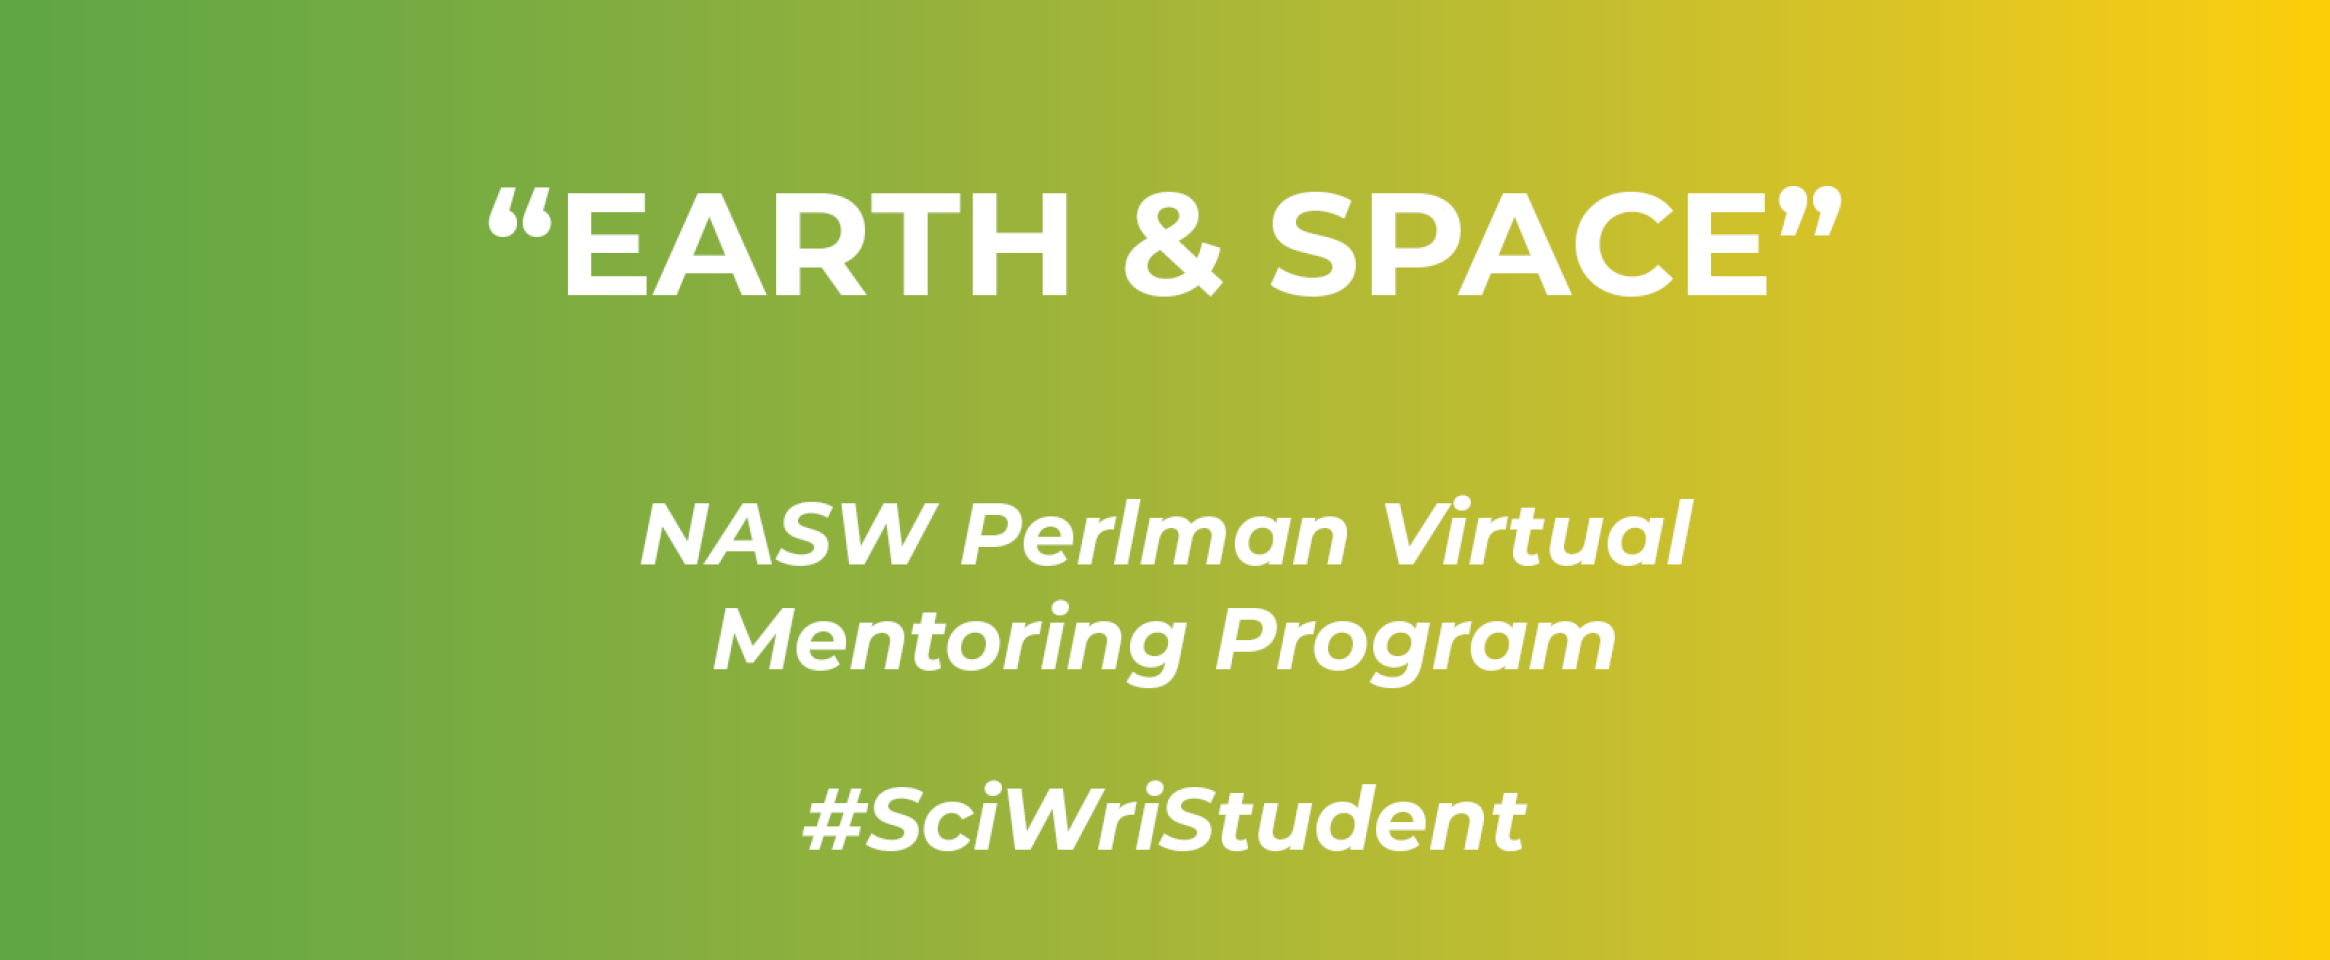 Horizontal graphic with text Earth & Space and N A S W Perlman Virtual Mentoring Program, and hashtag Sci Wri Student